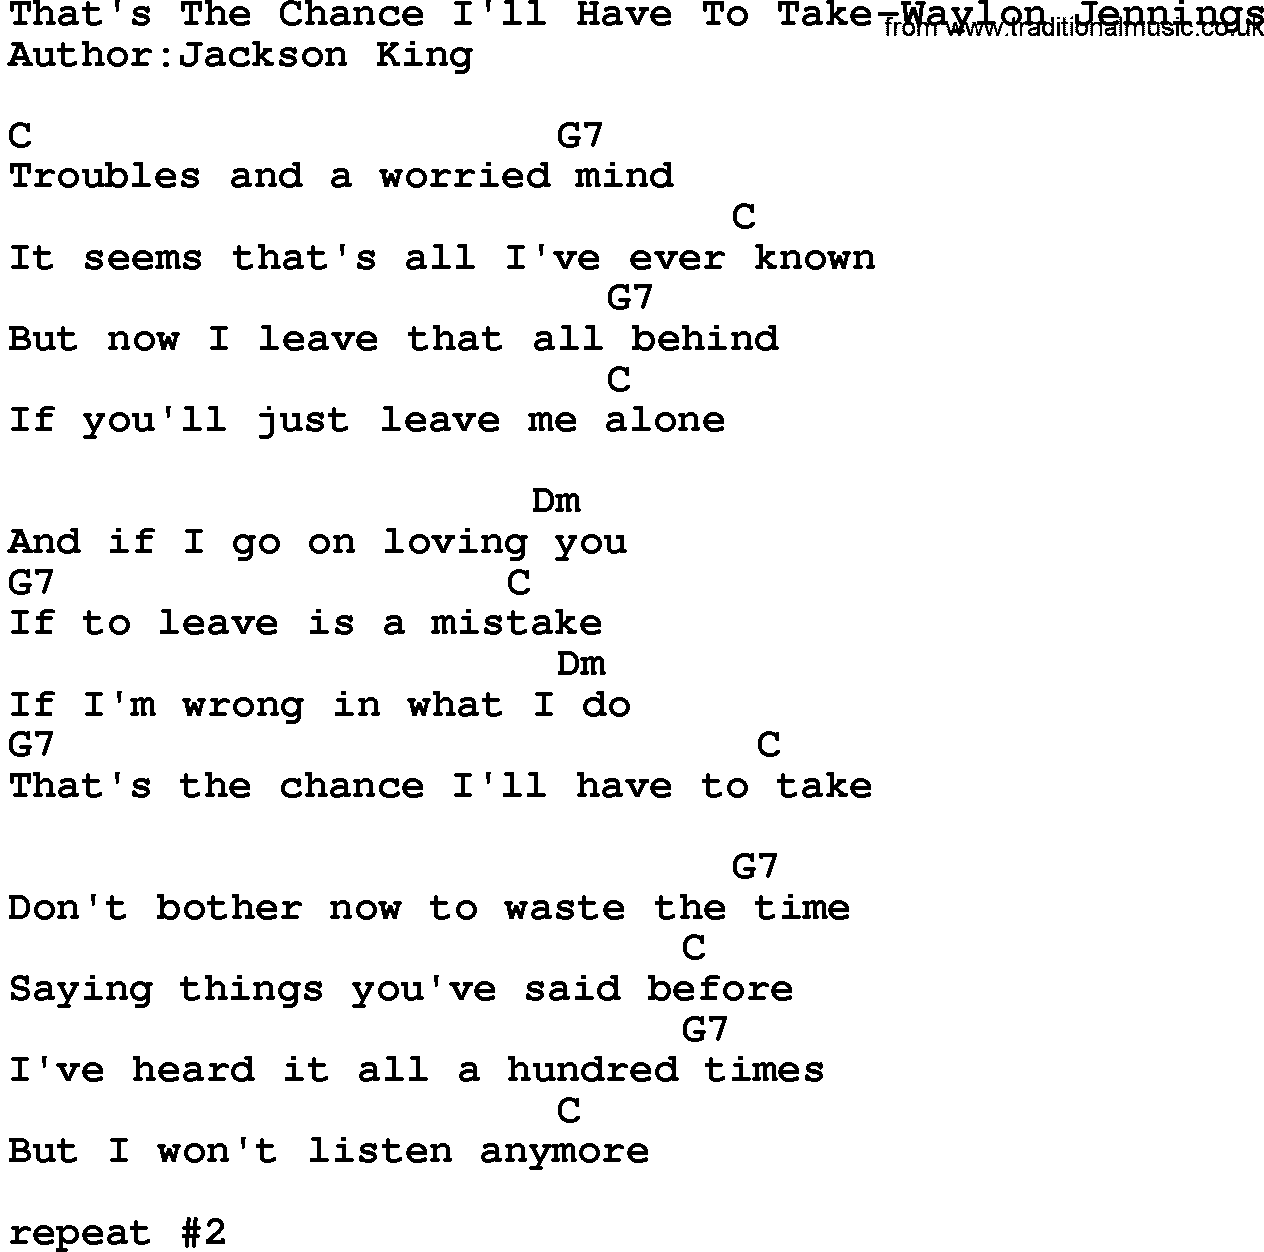 Country music song: That's The Chance I'll Have To Take-Waylon Jennings lyrics and chords